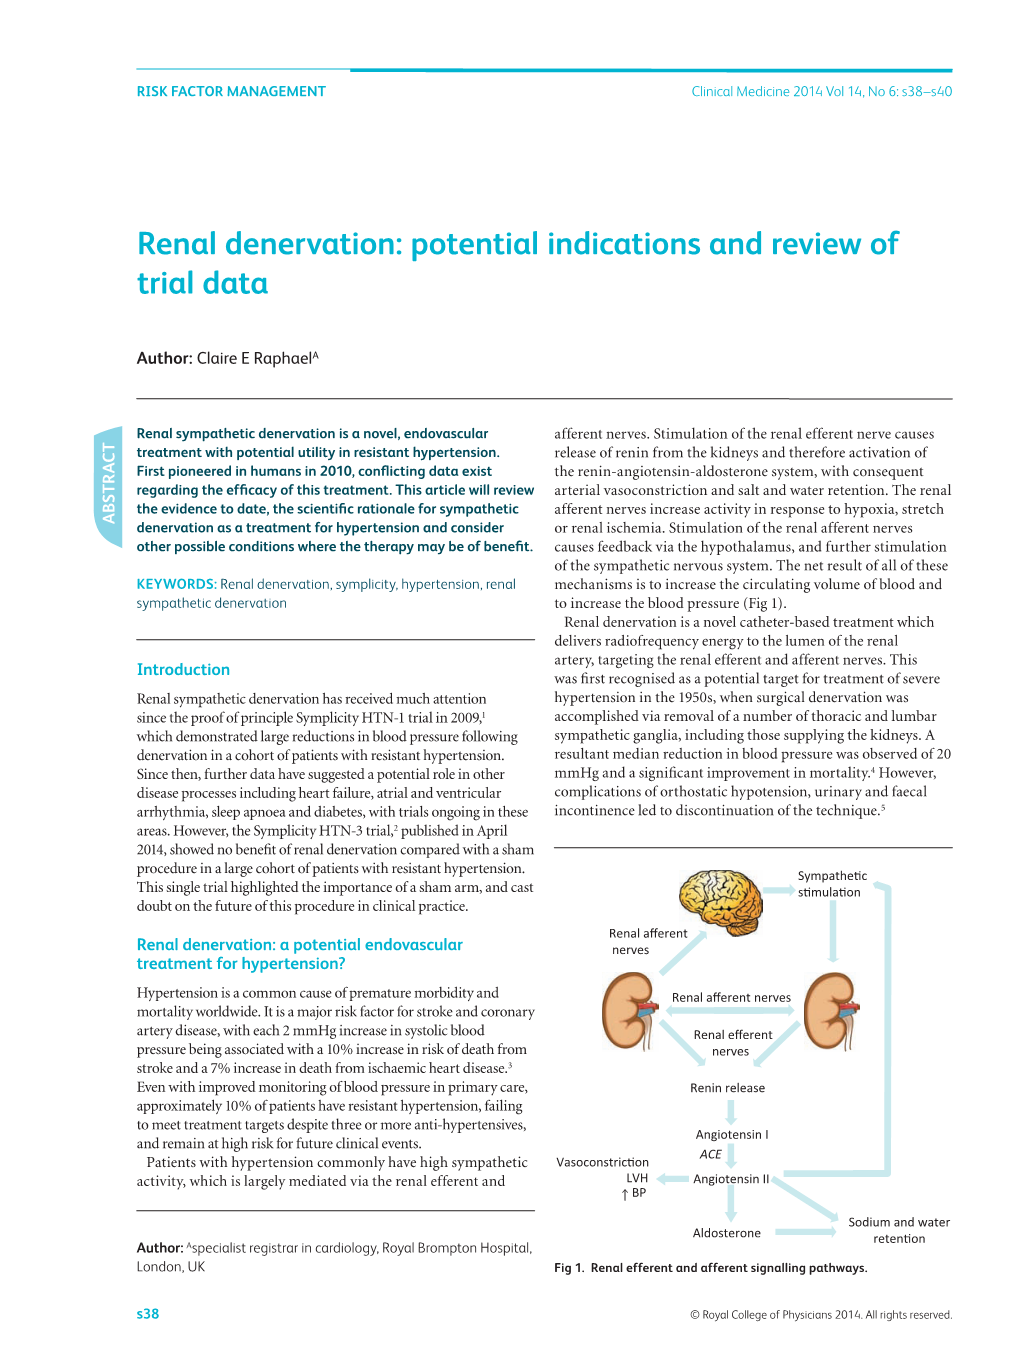 Renal Denervation: Potential Indications and Review of Trial Data